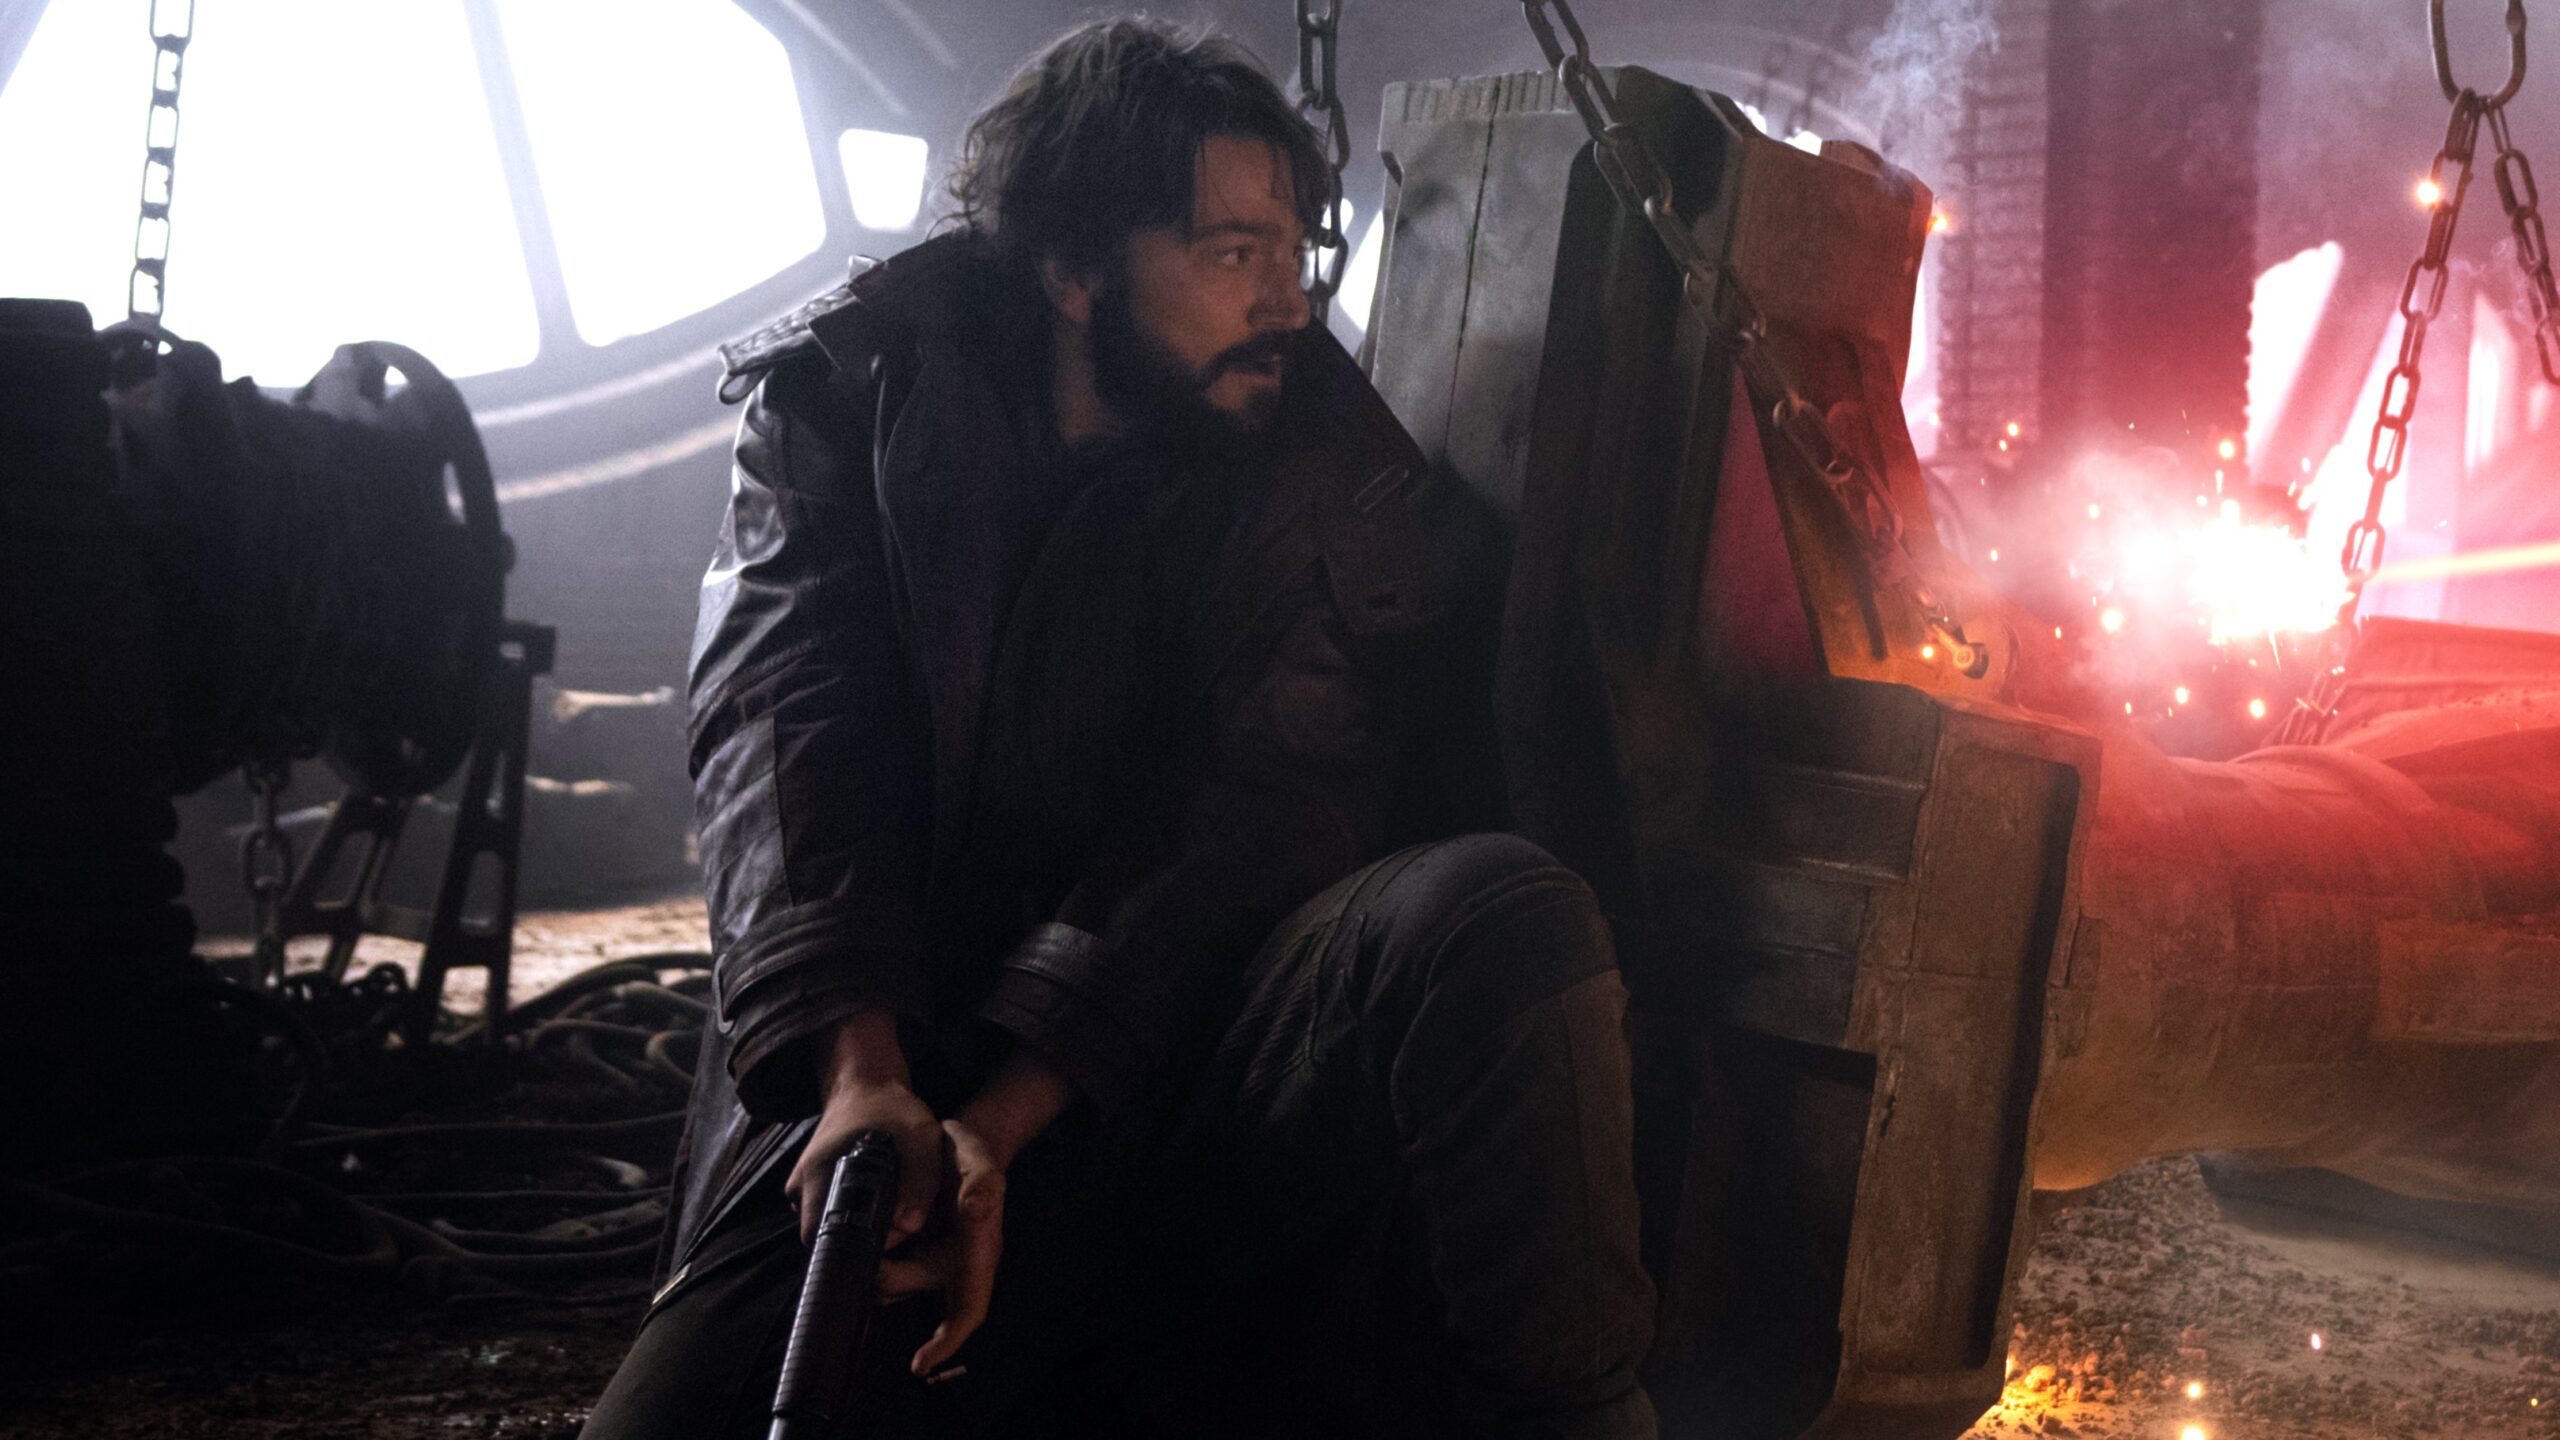 Andor' Episode 3 Recap: A Visually Stunning Firefight & Cassian Joins the Rebellion